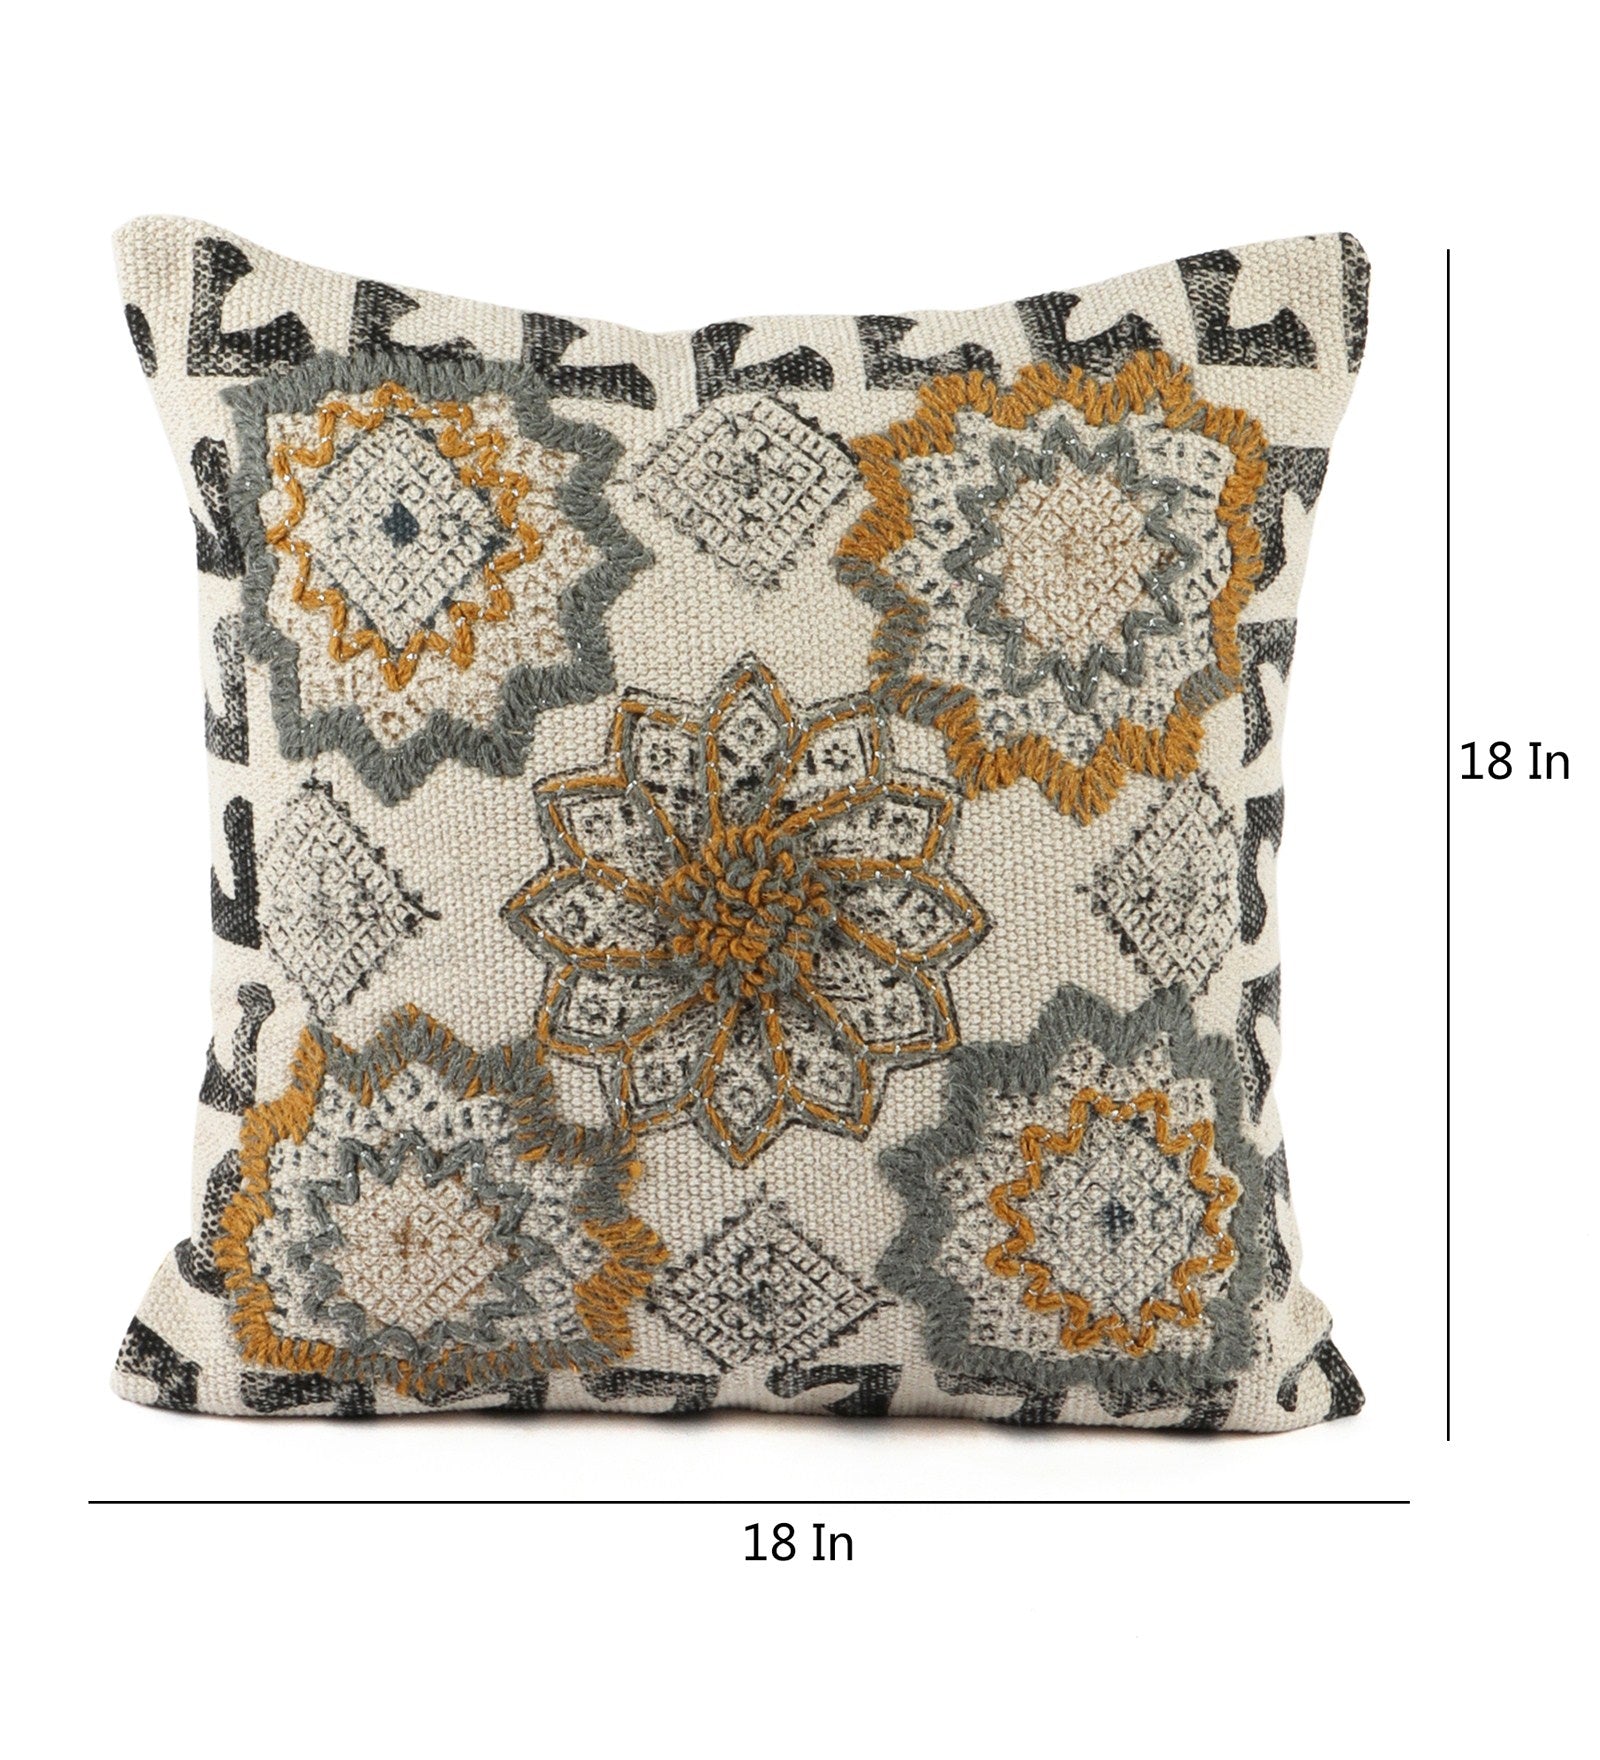 Embroidered Contemporary Cushion Cover (Beige Floral)